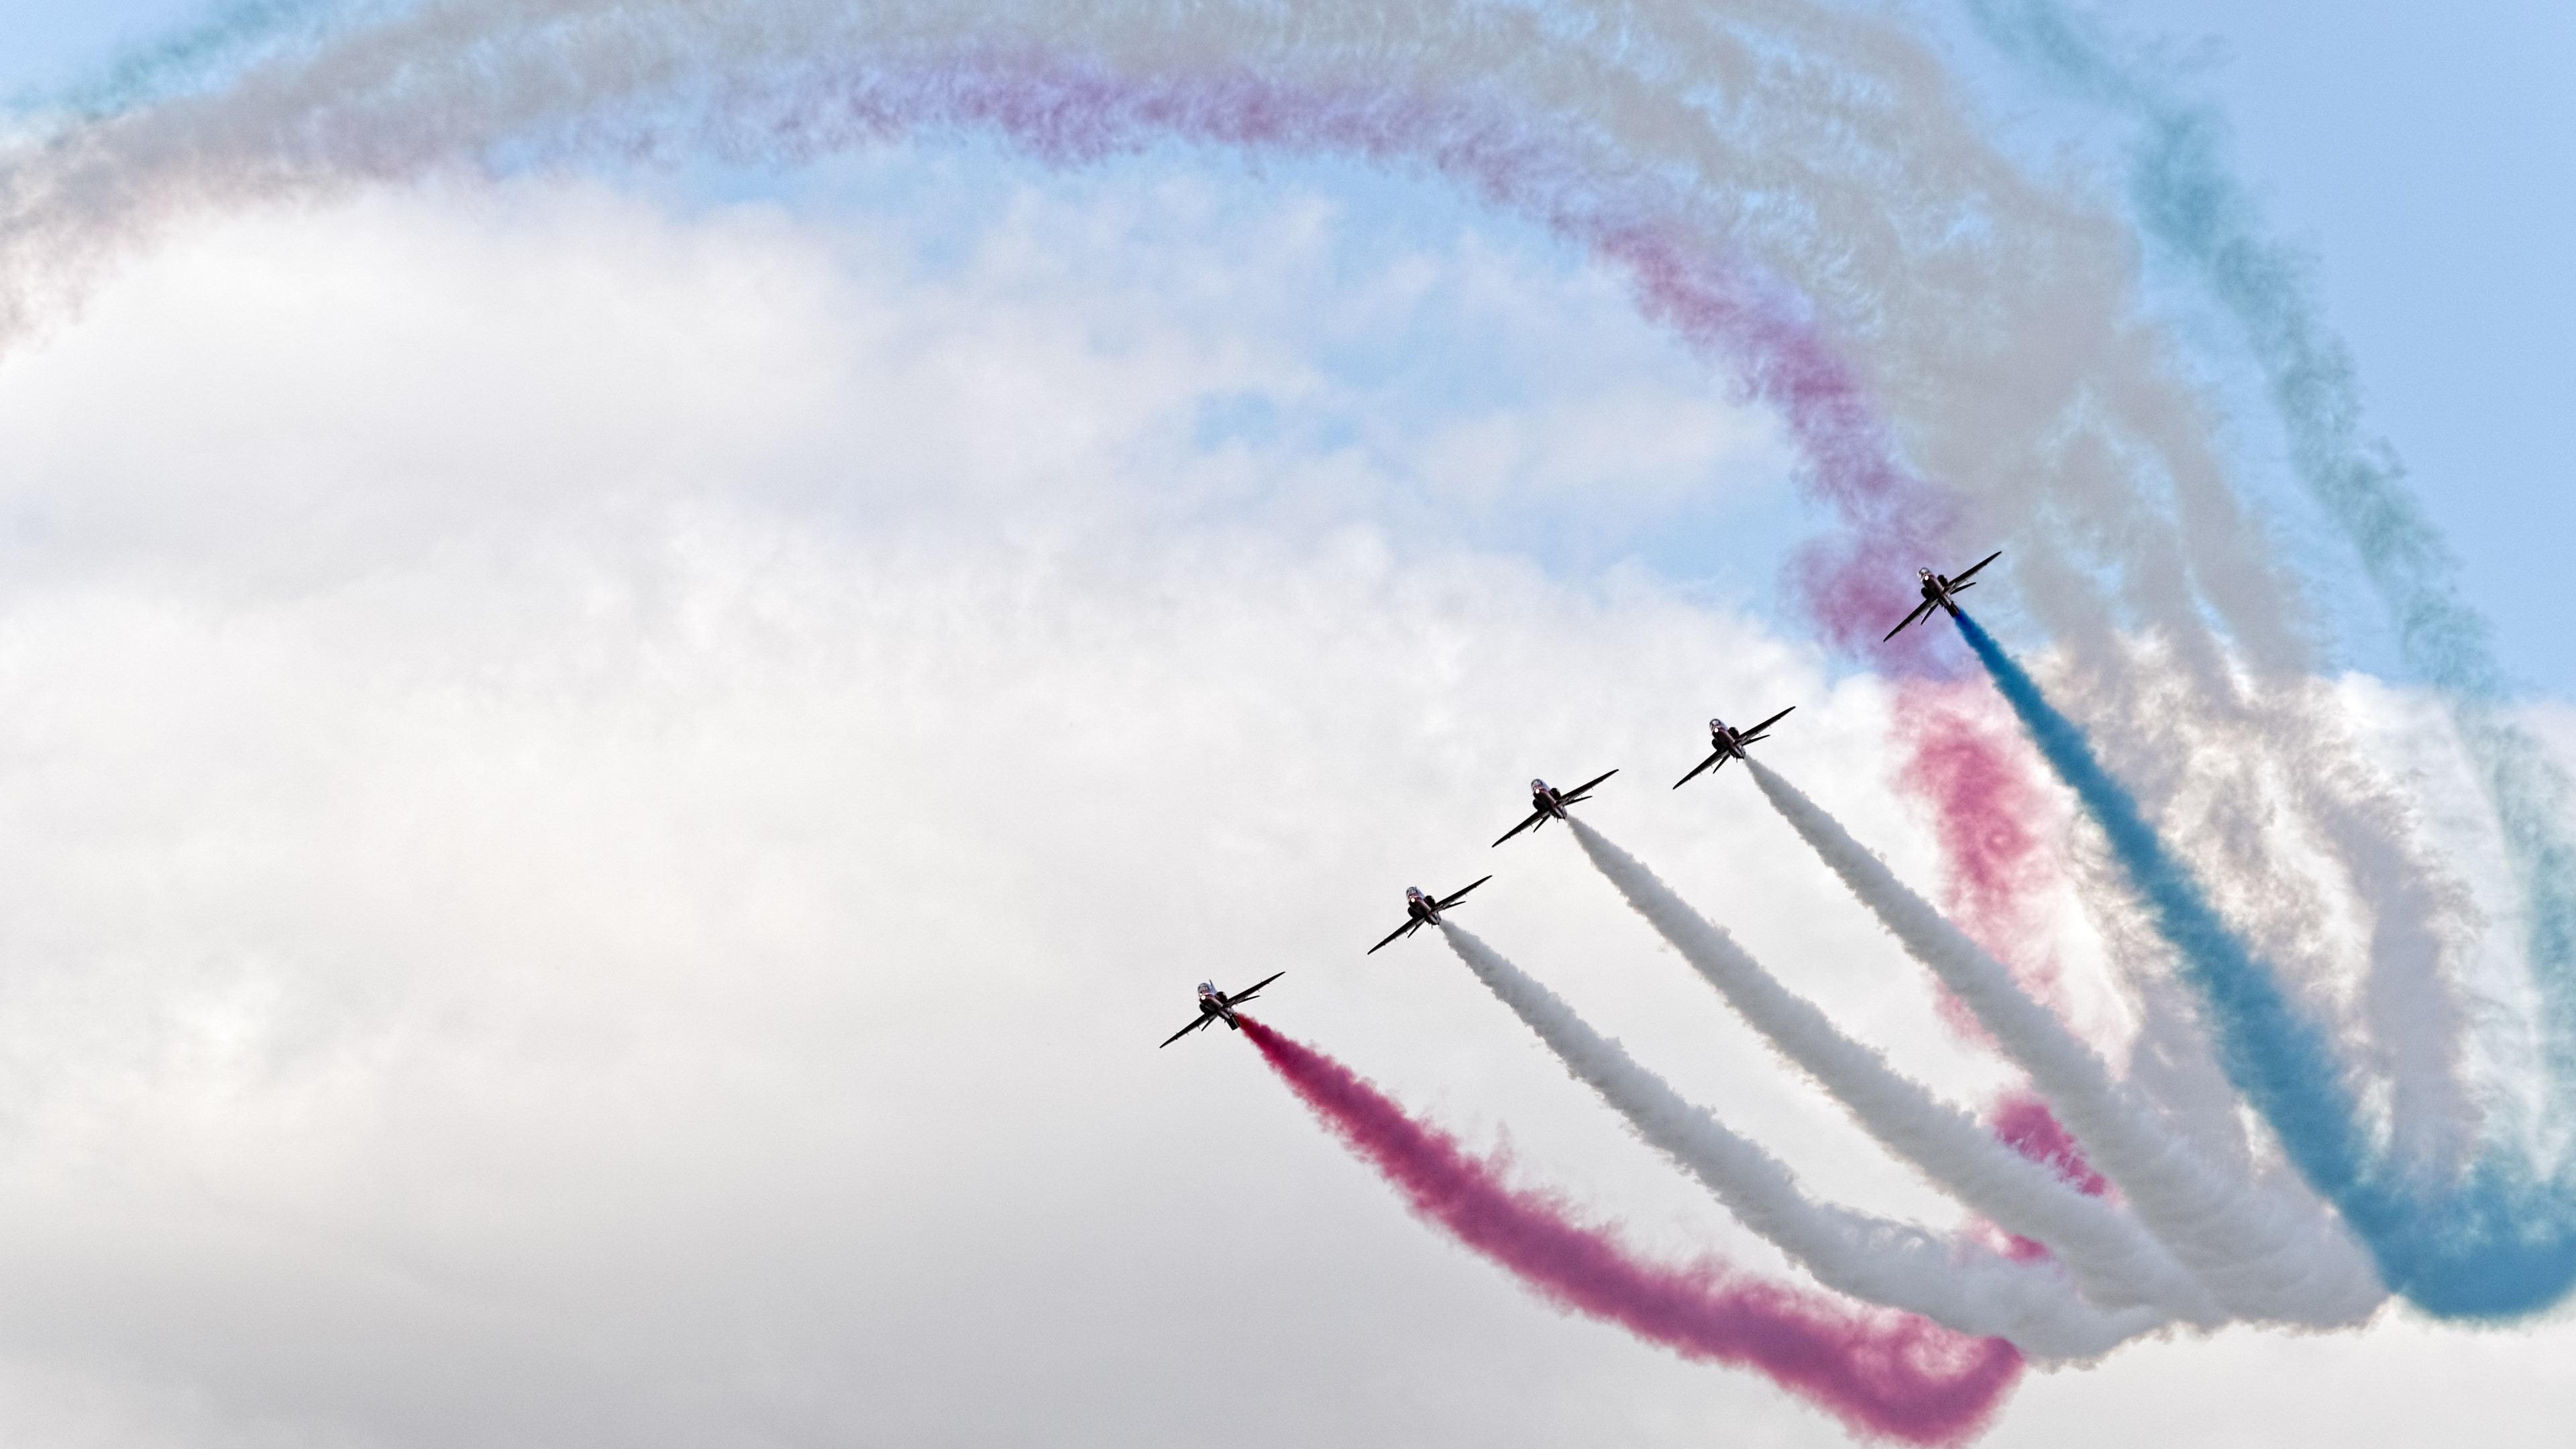 Red Arrows at Sywell Air Show wallpaper 3840x2160